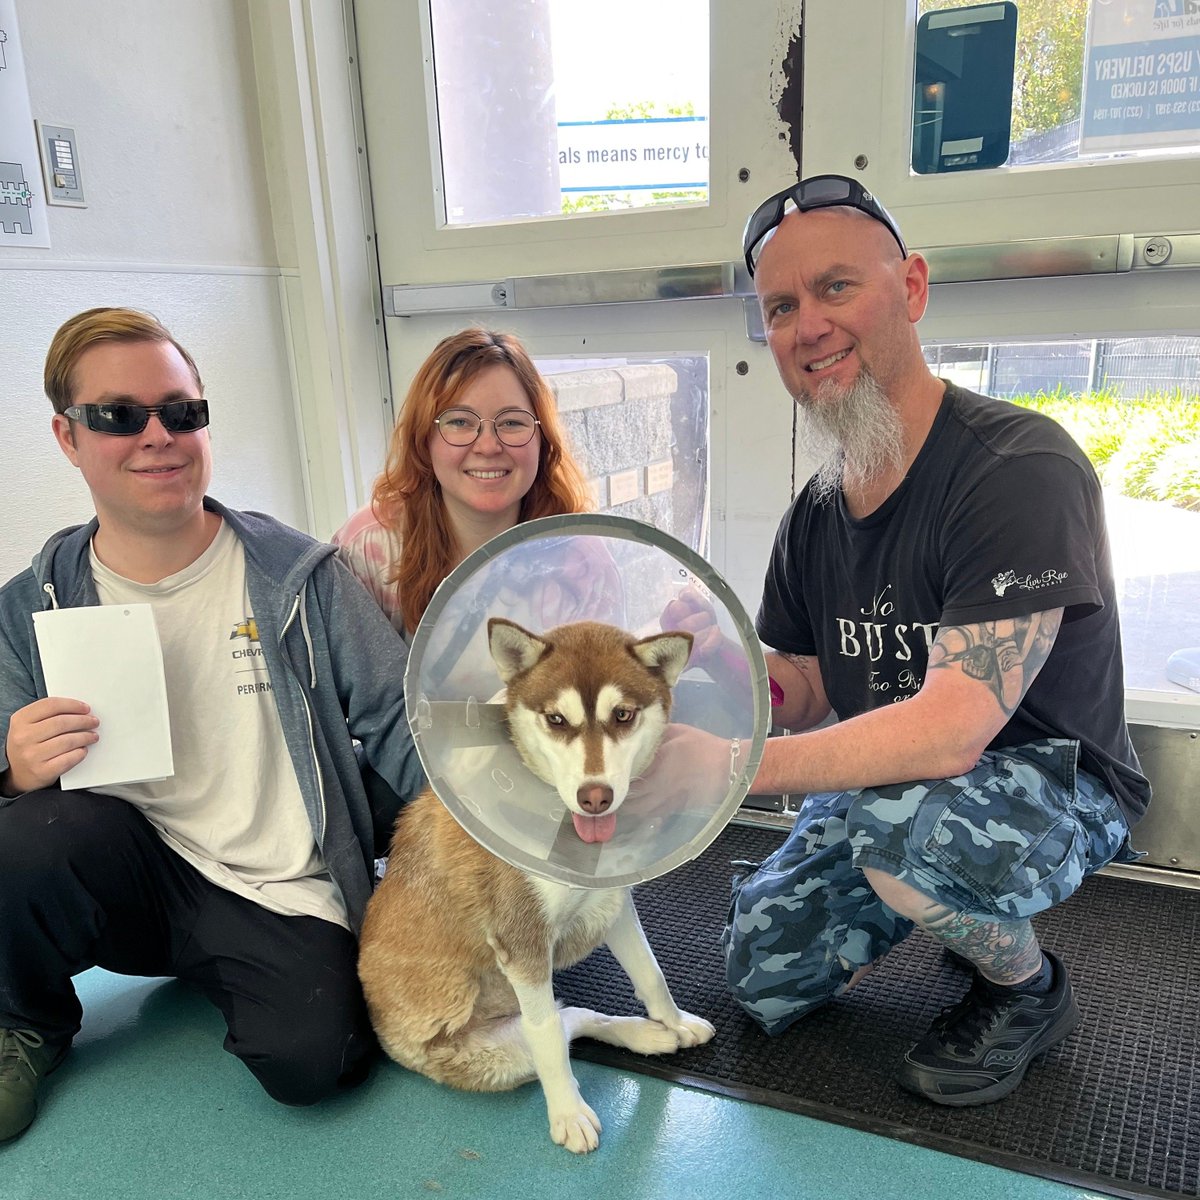 Going home with a cone! Happy day for Lotus and family. #FriendsForLife #spcaLAadopt #spcaLAalum #HappyAdoption #AdoptDontShop